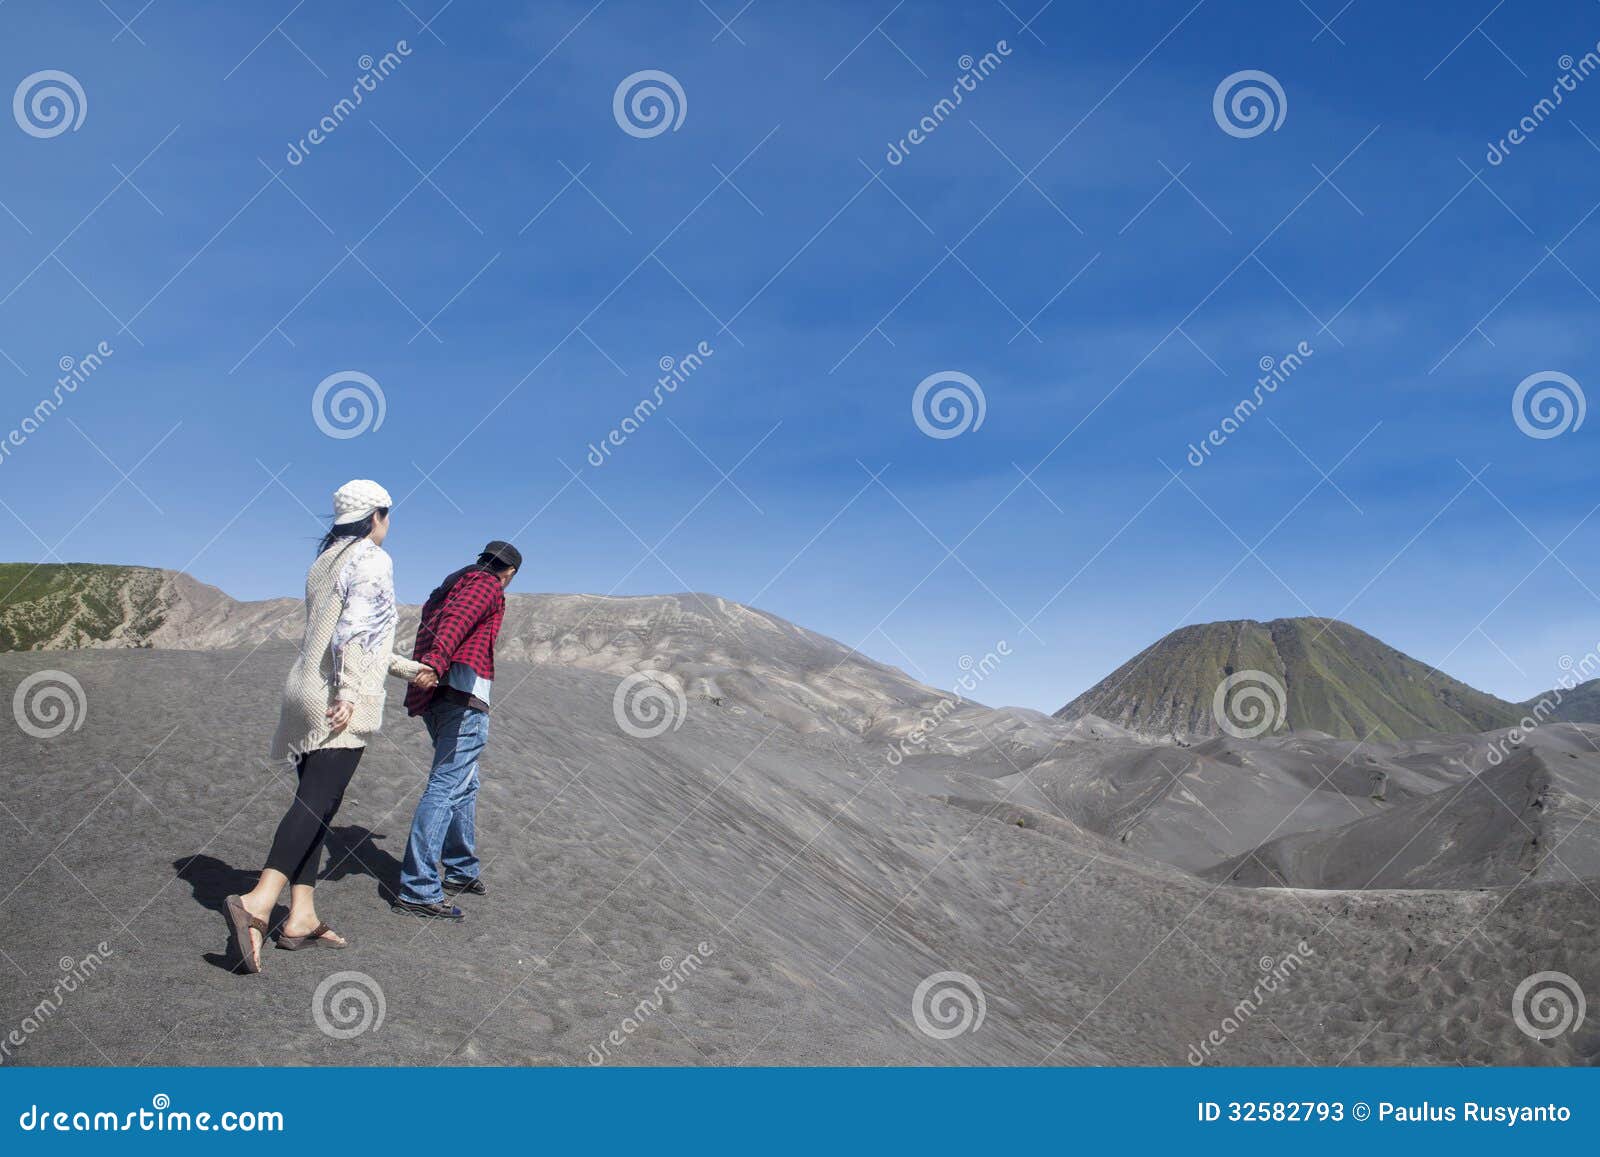 Couple Journey To Mount Bromo Outdoor Stock Image - Image of mount